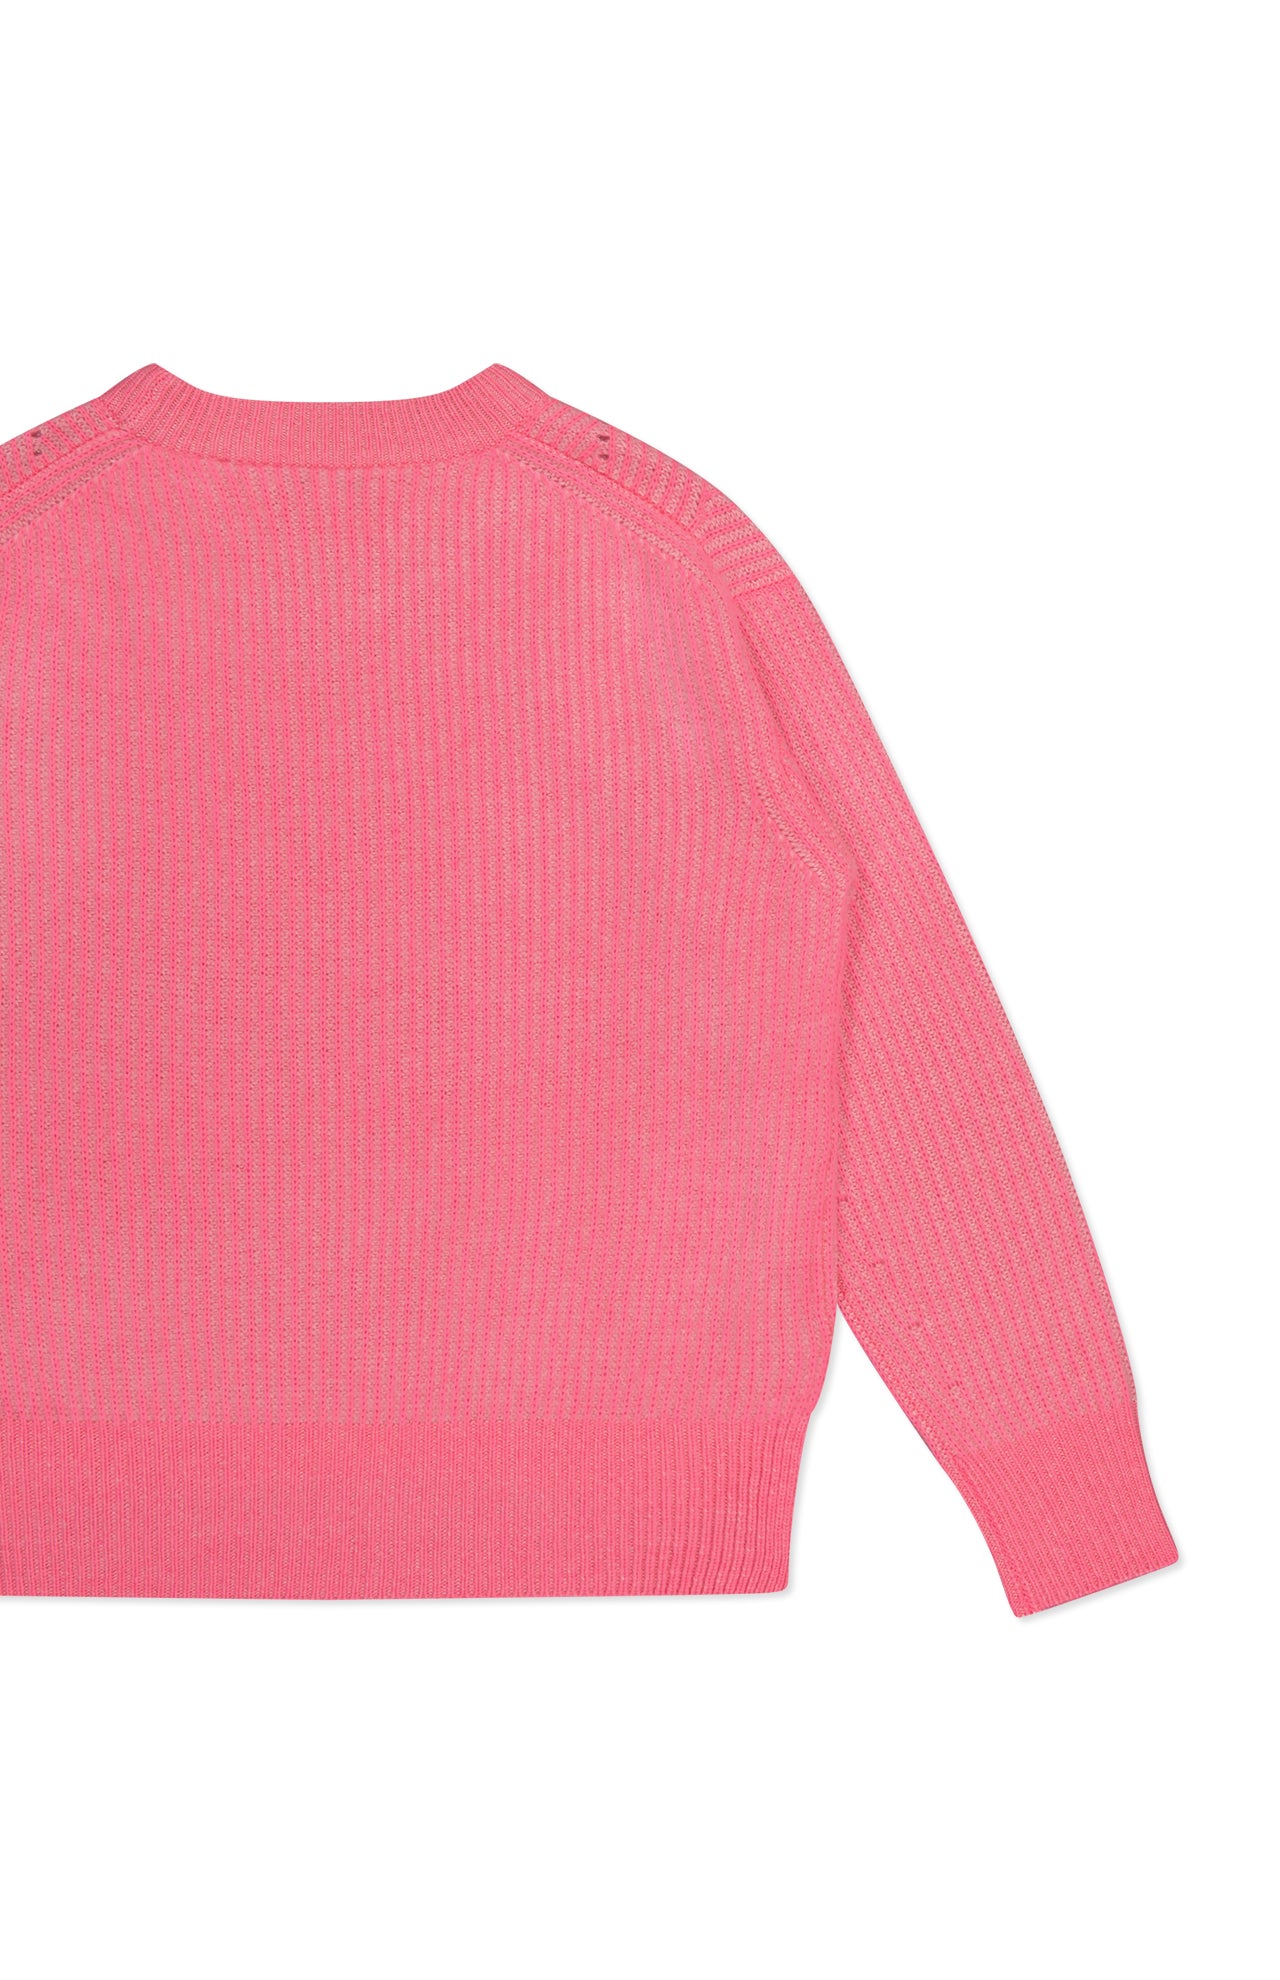 Cashmere Two-Tone Ribbed Crewneck (7254356623475)